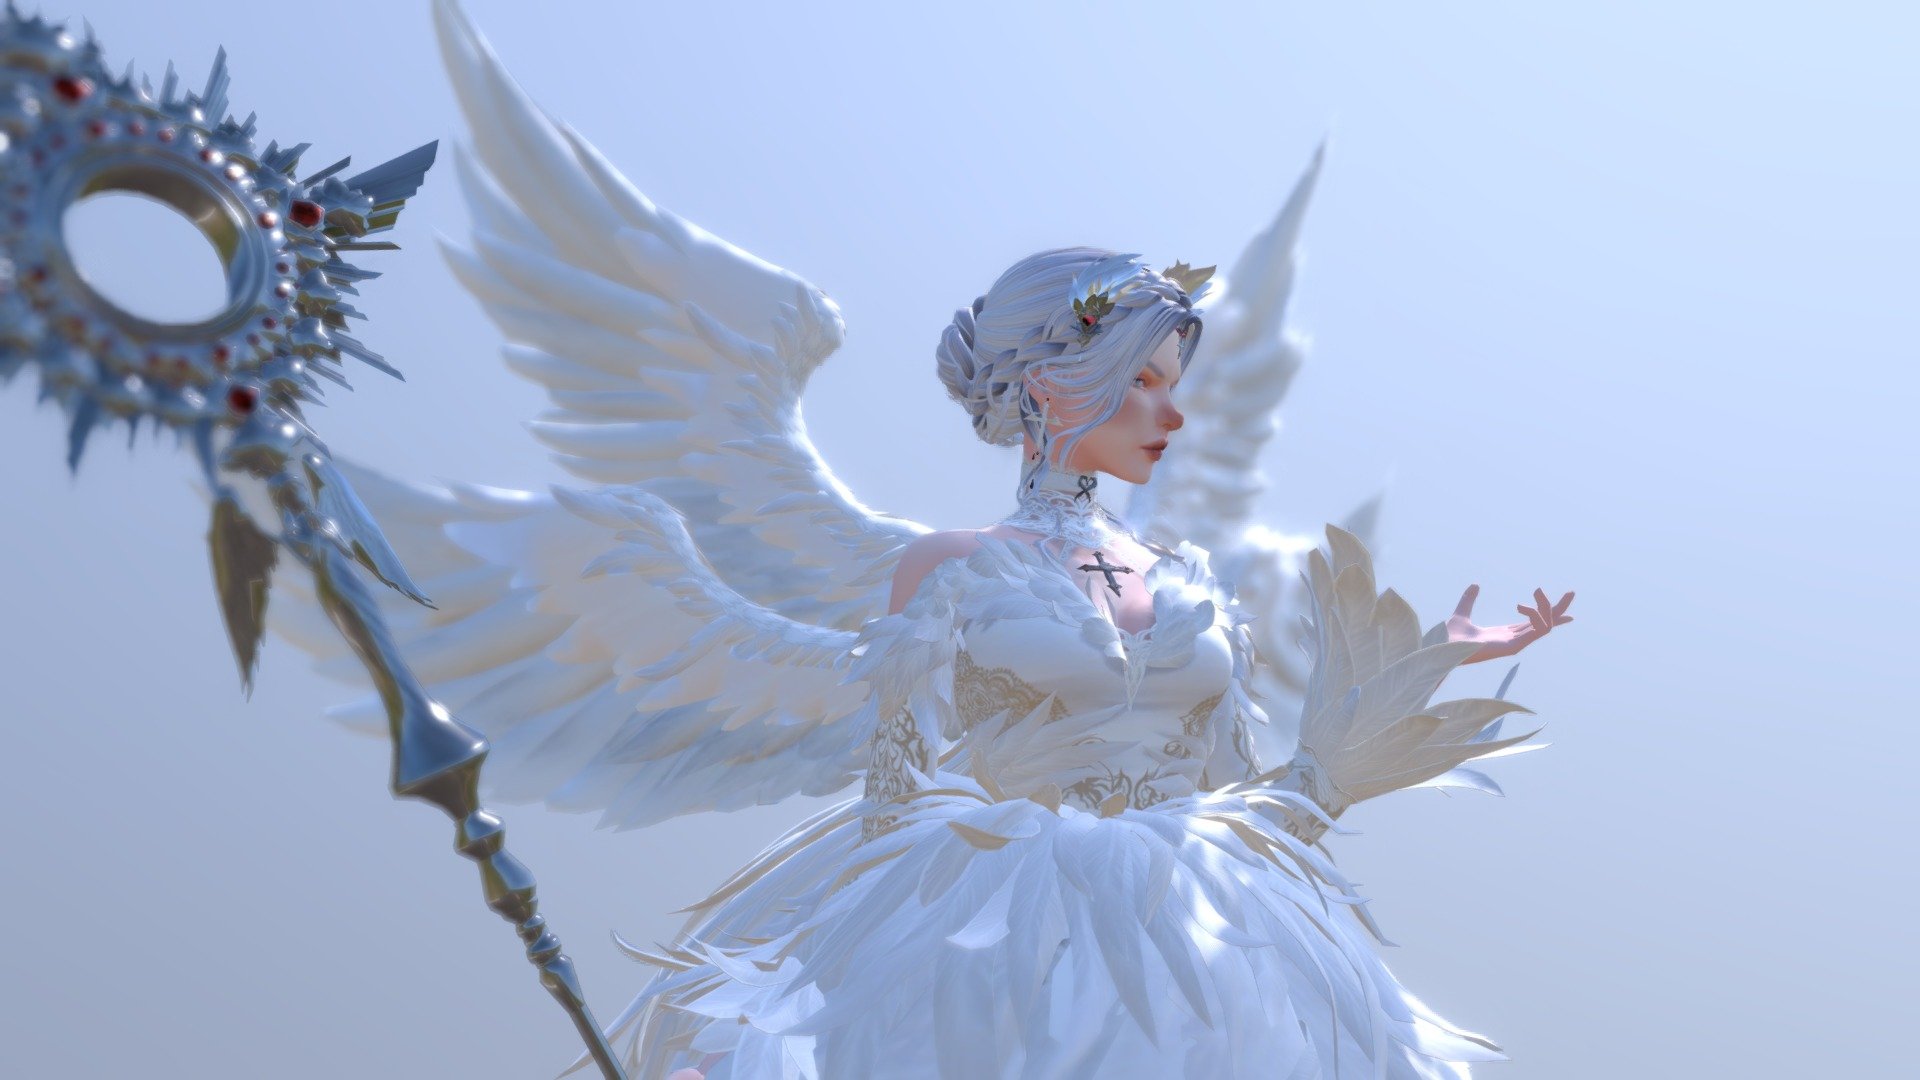 3d model created in Blender 3.3.1
All textures are included - Angelic Winter star - 3D model by KittyBarnes 3d model